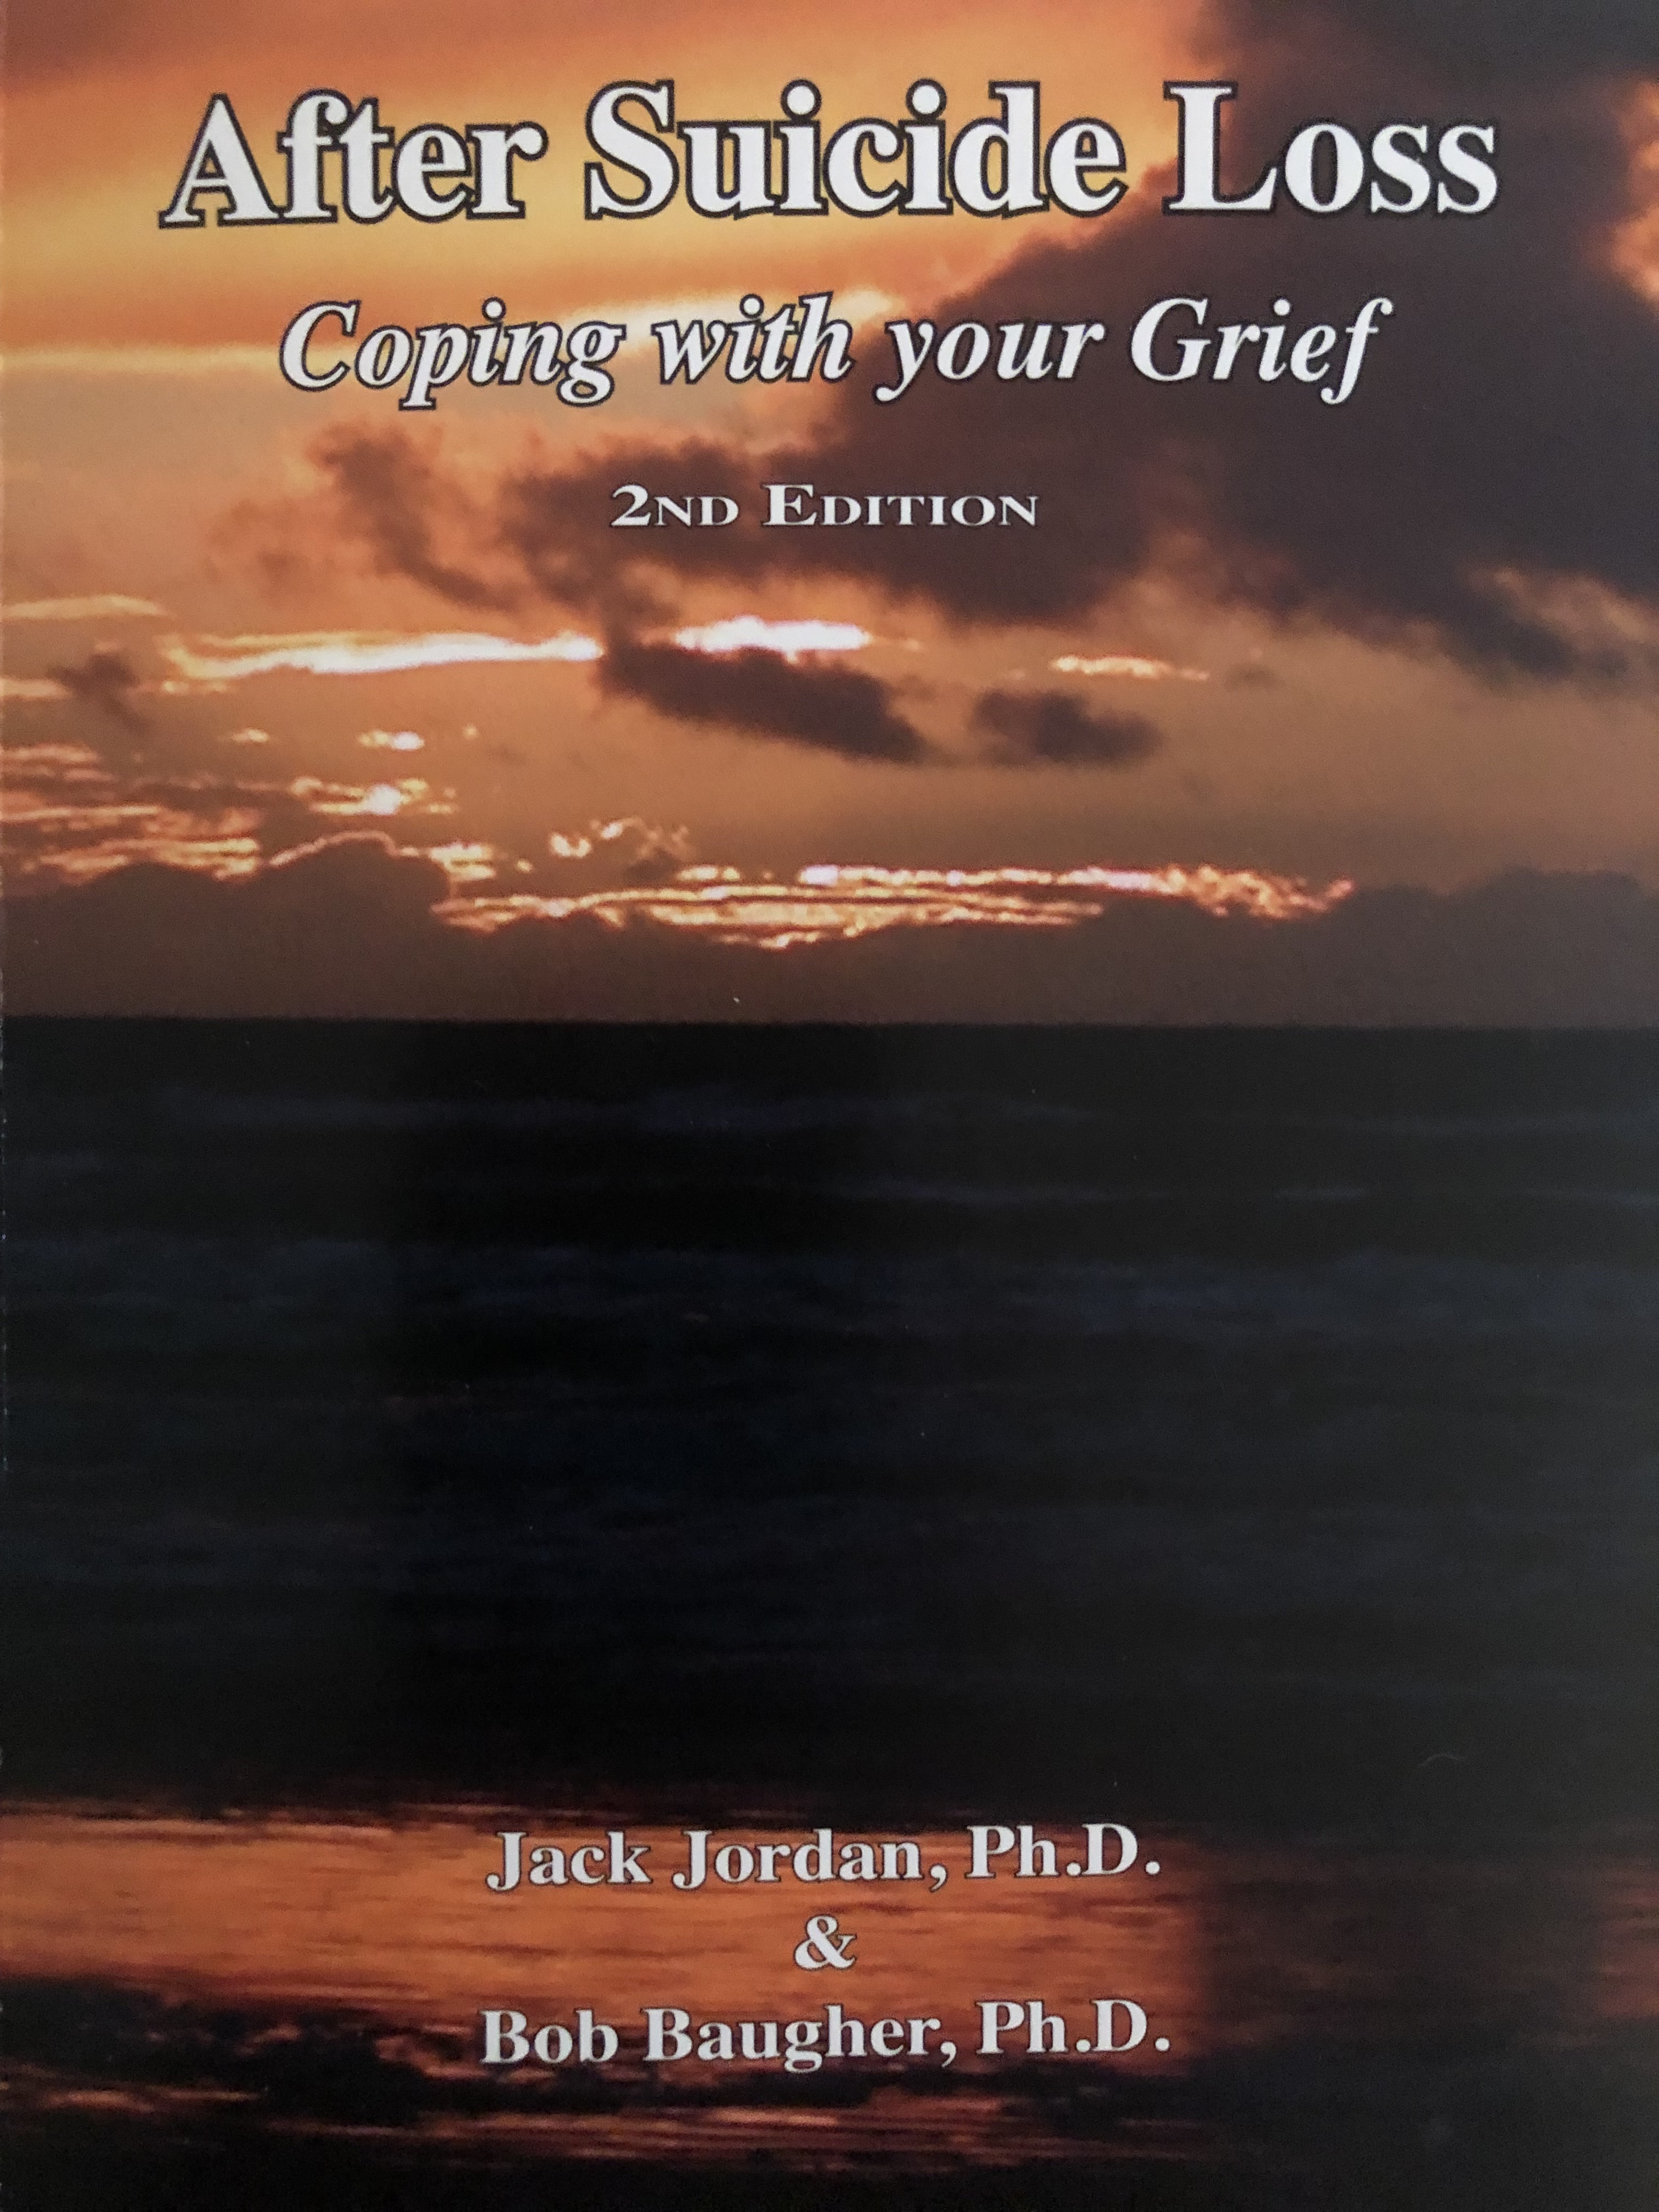 After Suicide Loss Coping with Your Grief